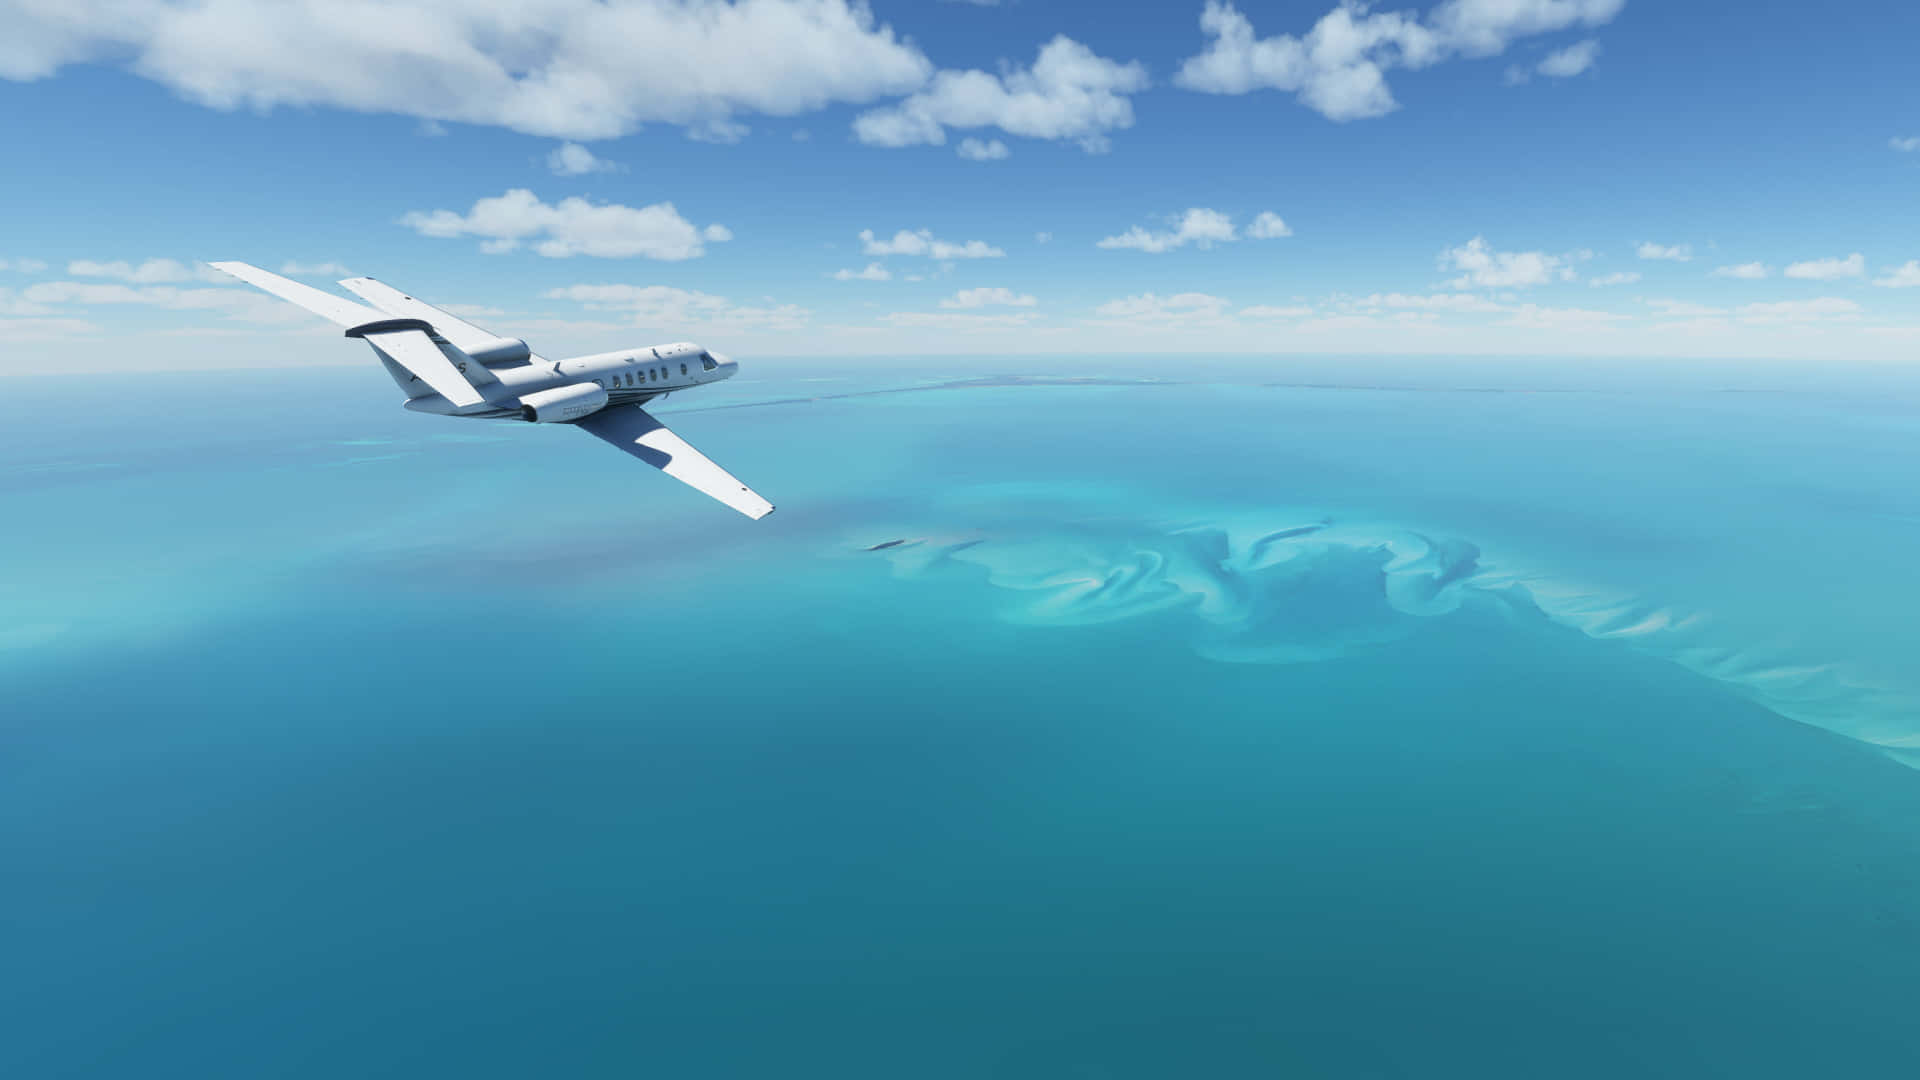 Experience the thrill of flying with Microsoft Flight Simulator